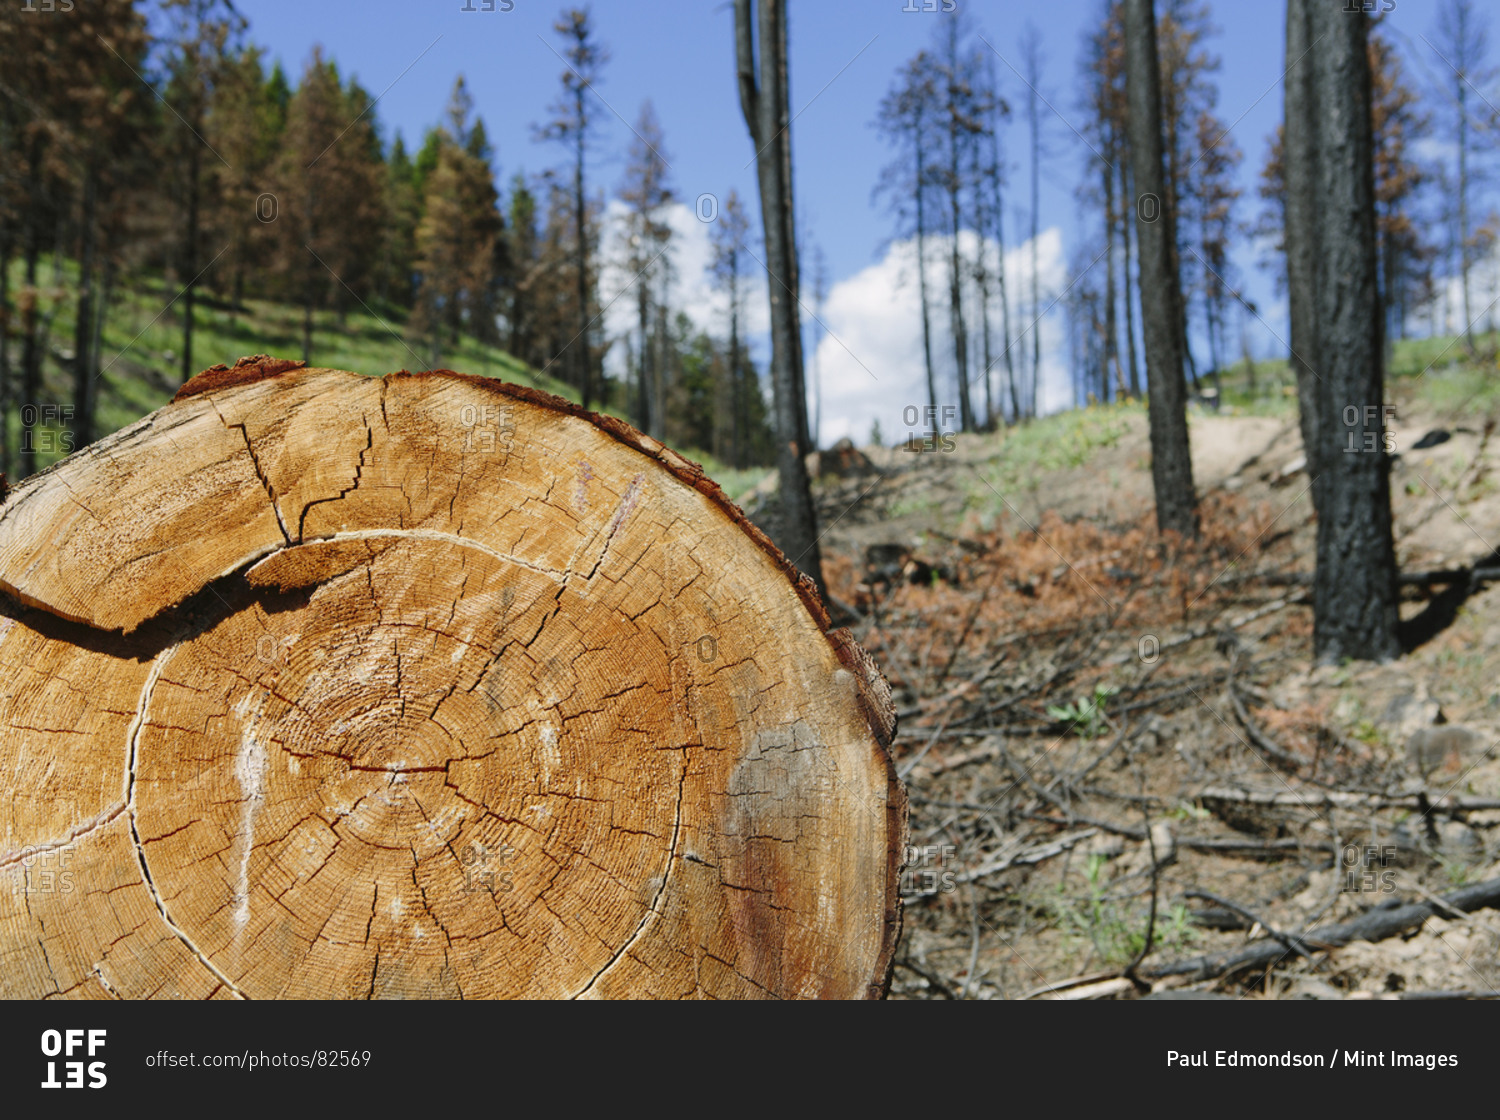 Cross section of cut Ponderosa Pine tree in recently burned forest